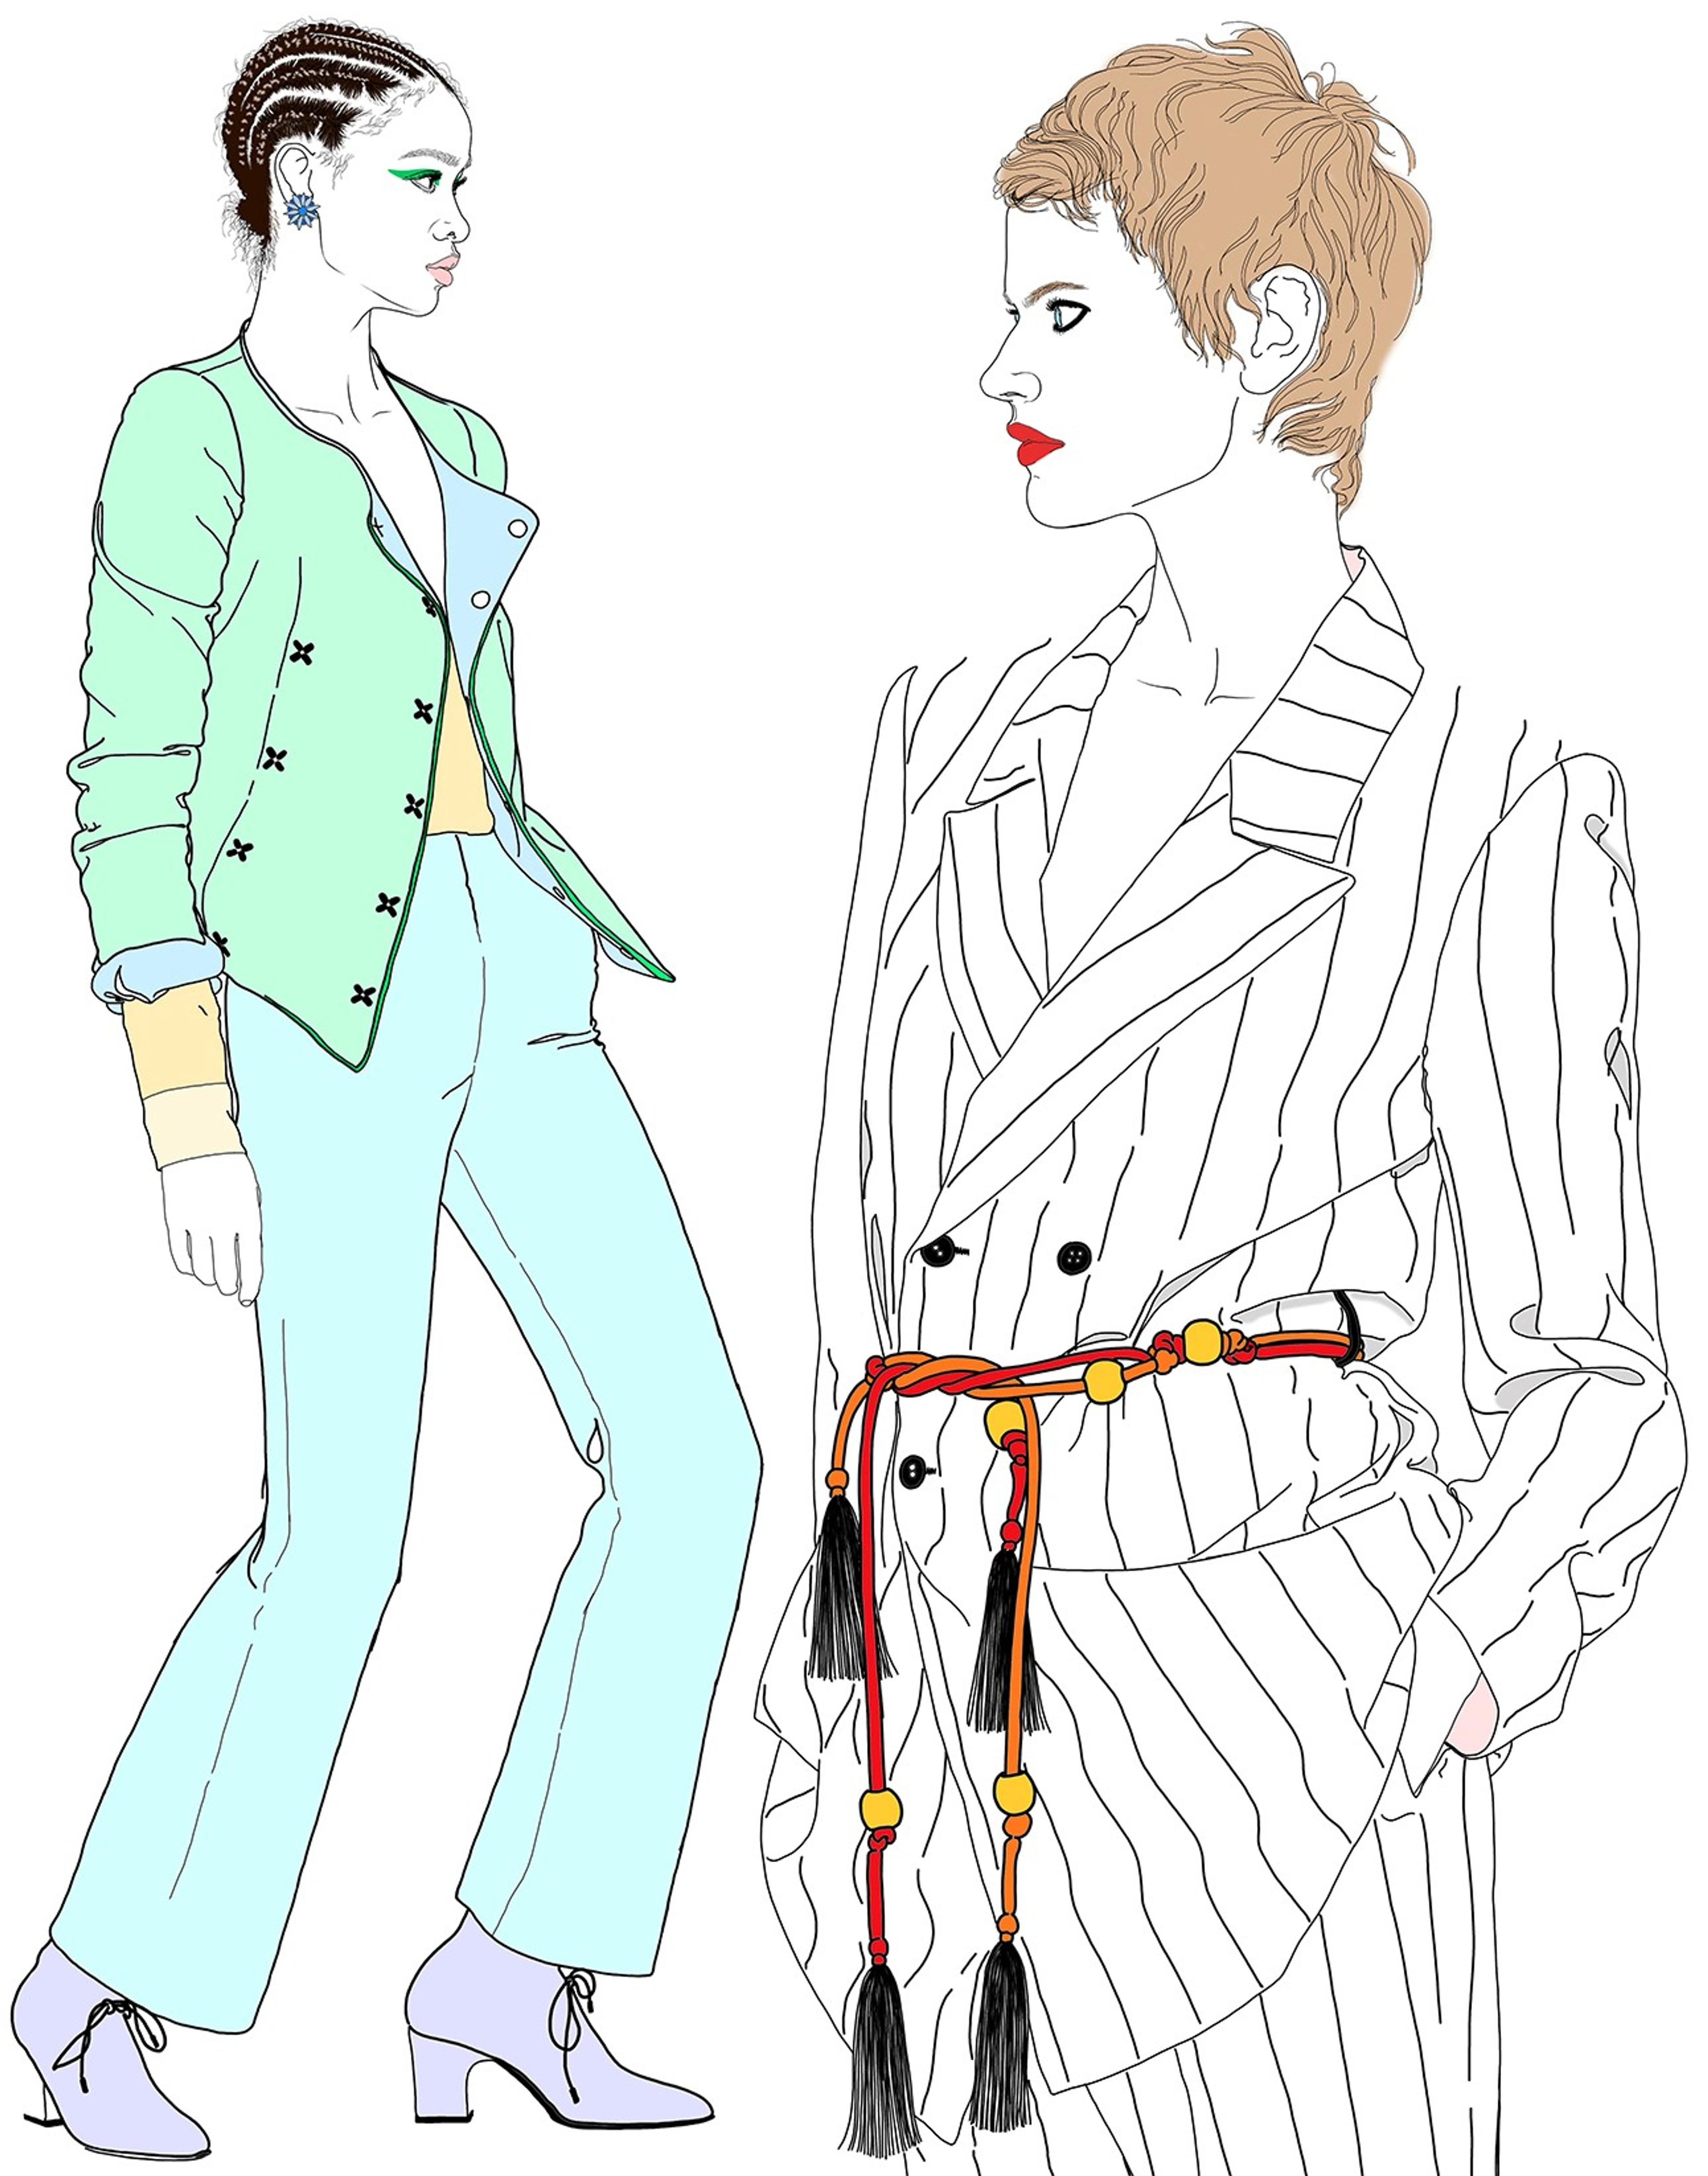 Illustration of two figures wearing suits.